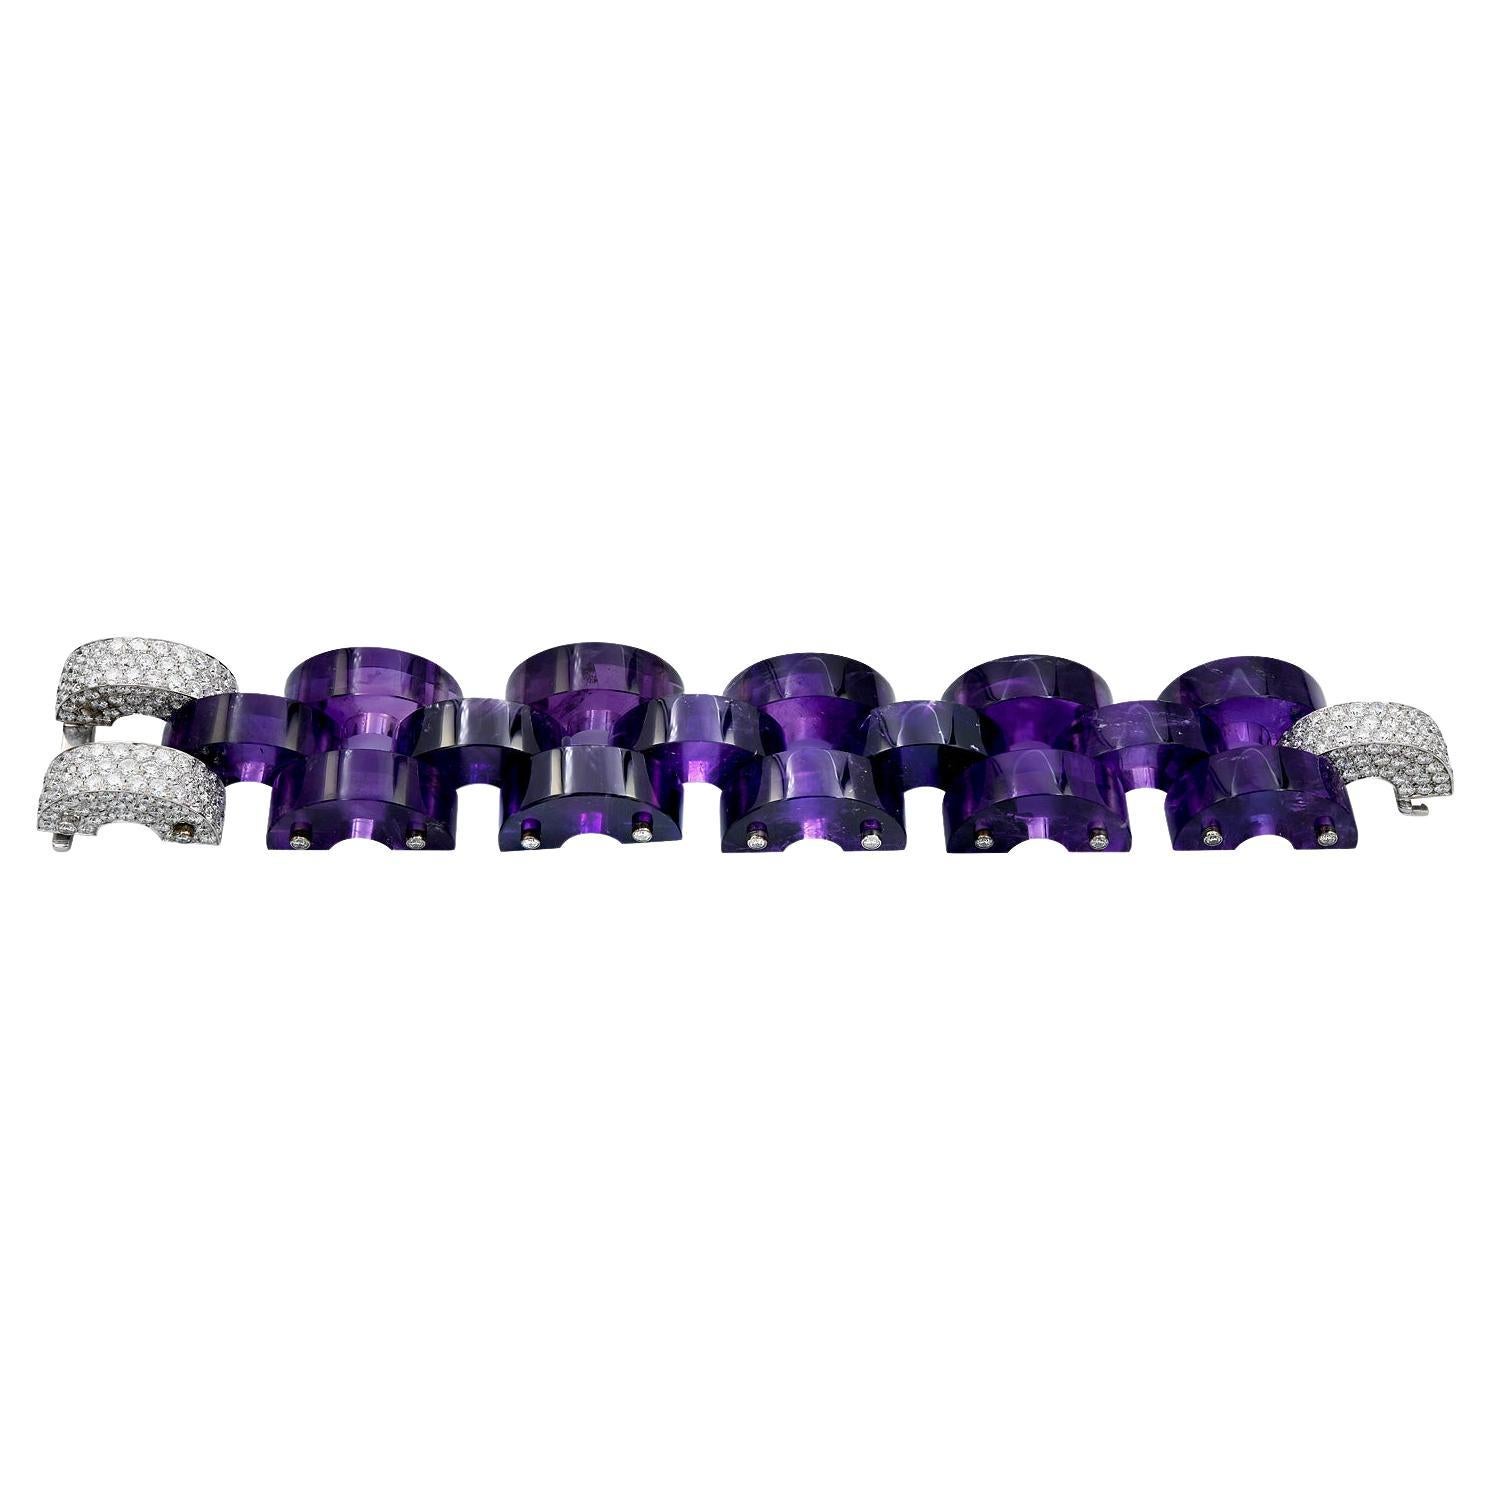 This high quality, substantial bracelet is composed of 15 amethyst flexible links, attached to one another on 18 karat white gold bars. The clasp is accented by 291 round brilliant-cut diamonds, weighing a total of 17.90 carats. Diamonds are D to F